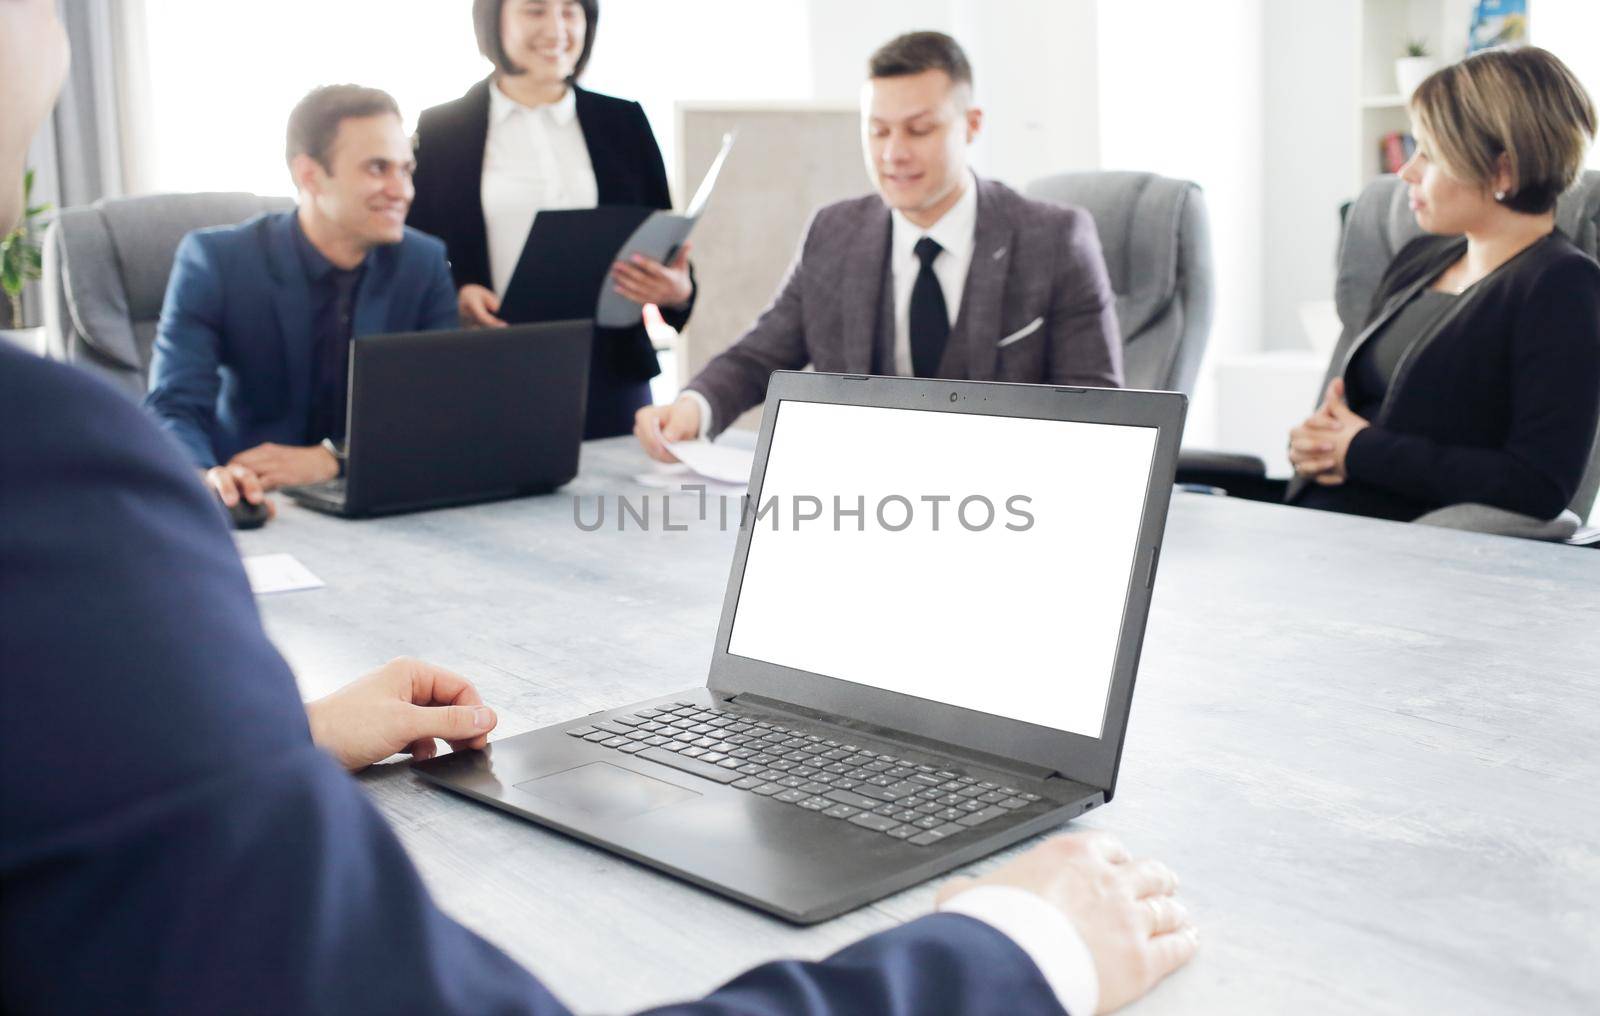 Laptop against the background of a group of young business people in the office discussing a work idea together by selinsmo